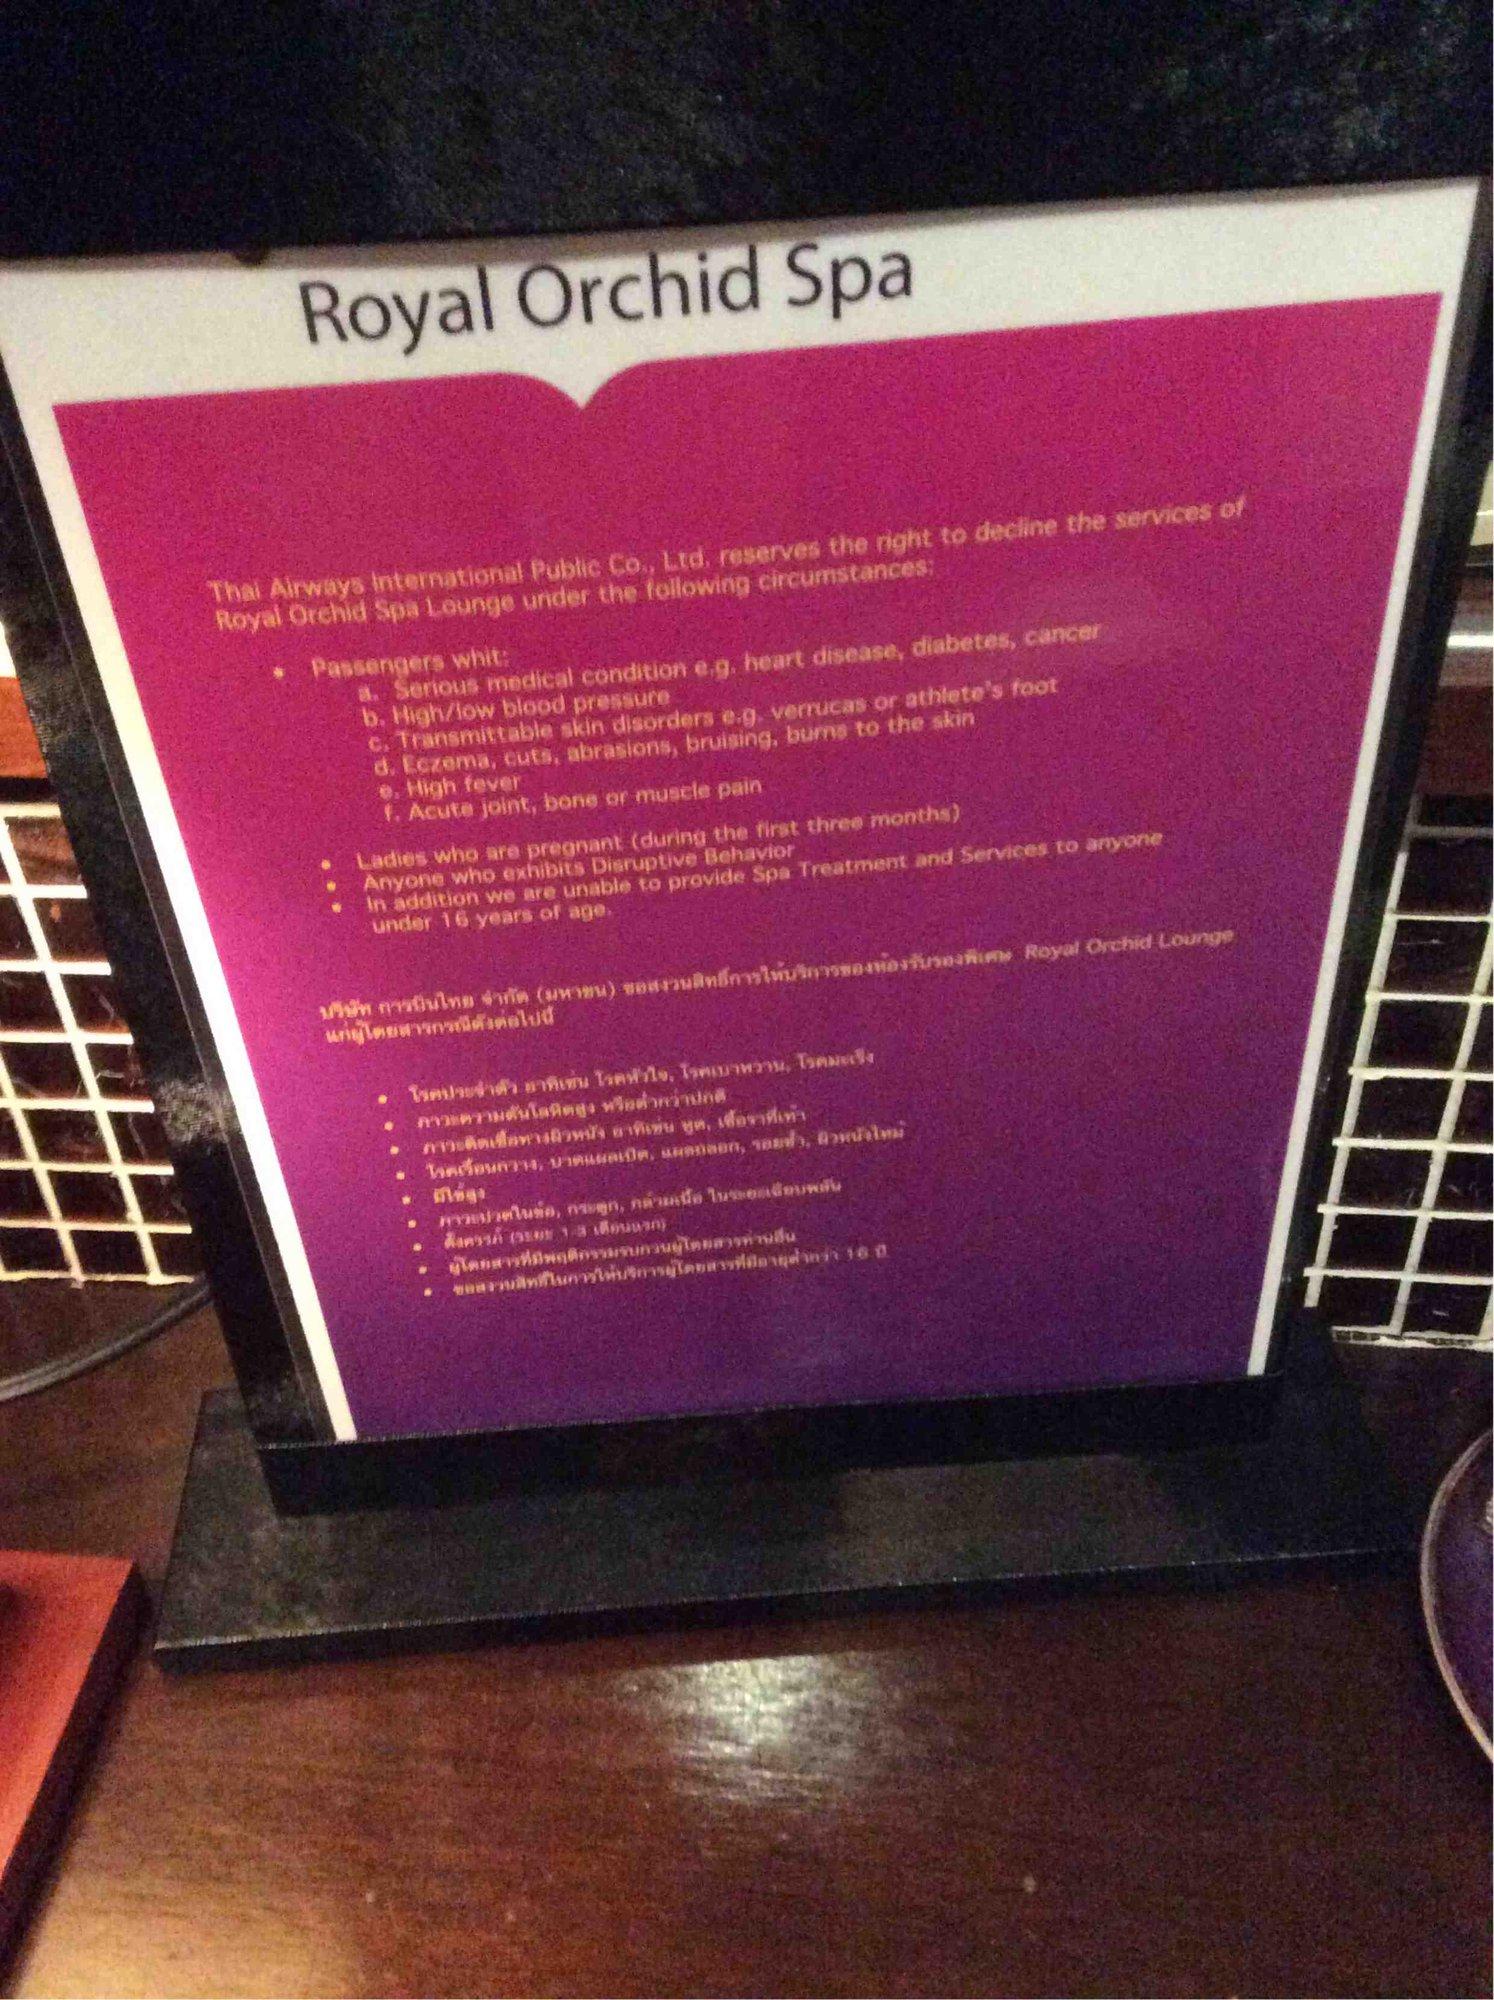 Thai Airways Royal Orchid Spa  image 22 of 25